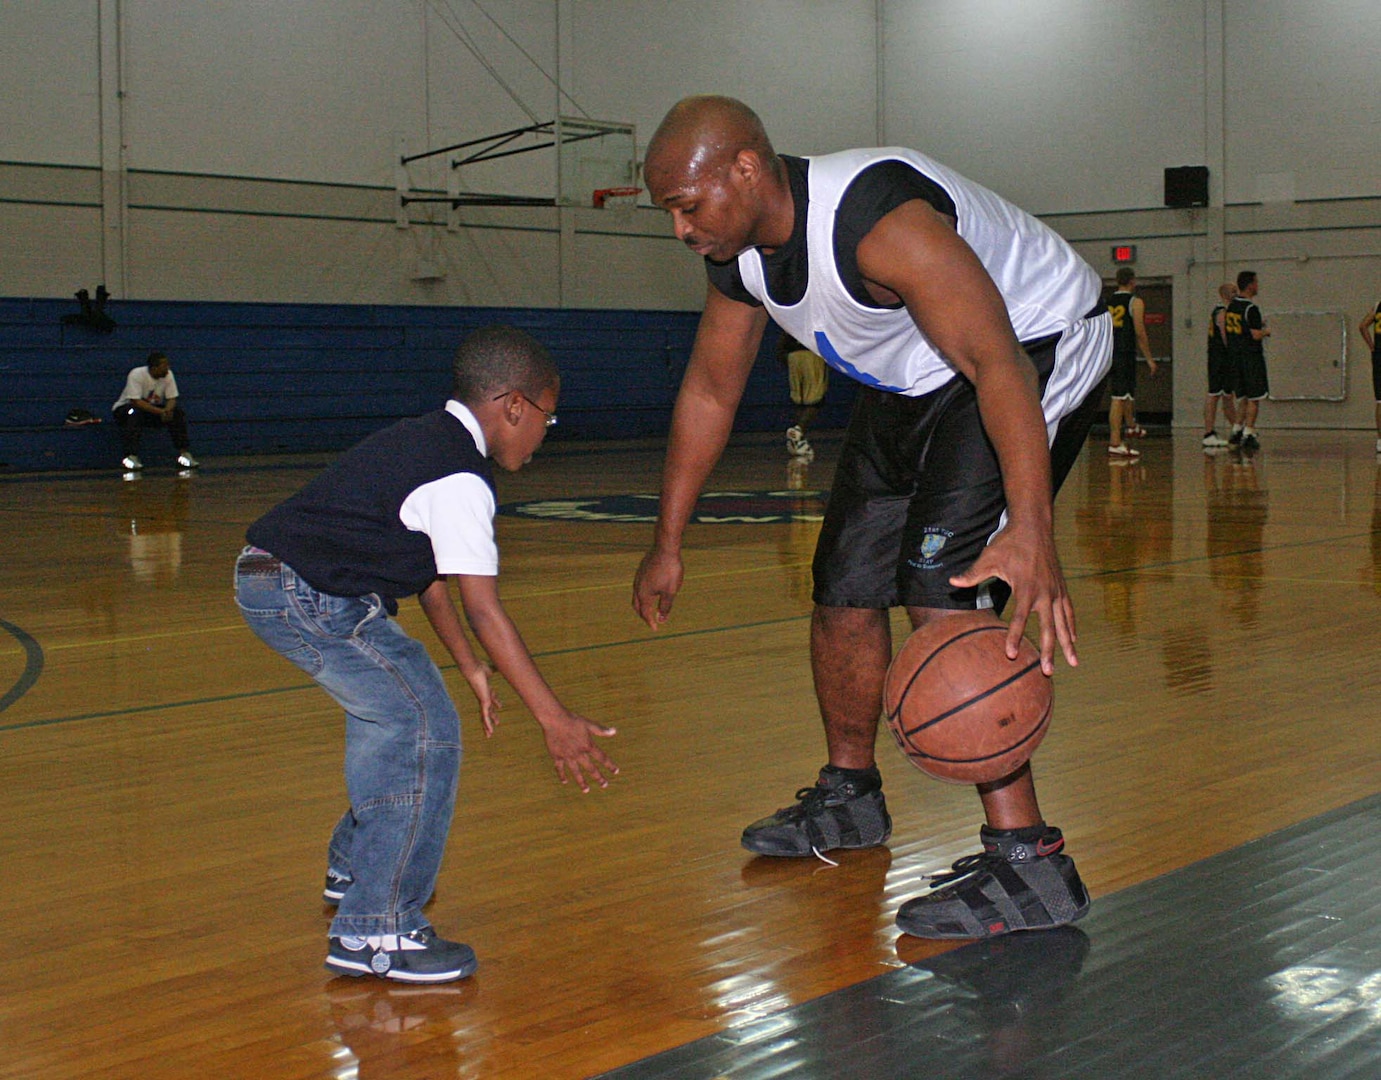 Angelo Baxter from the 314th Military Intelligence Battalion teaches dribbling to his son Elisha during half time Jan. 25 at the Chaparral Fitness Center. (Photo by Army Spc. Tim Luukkonen)